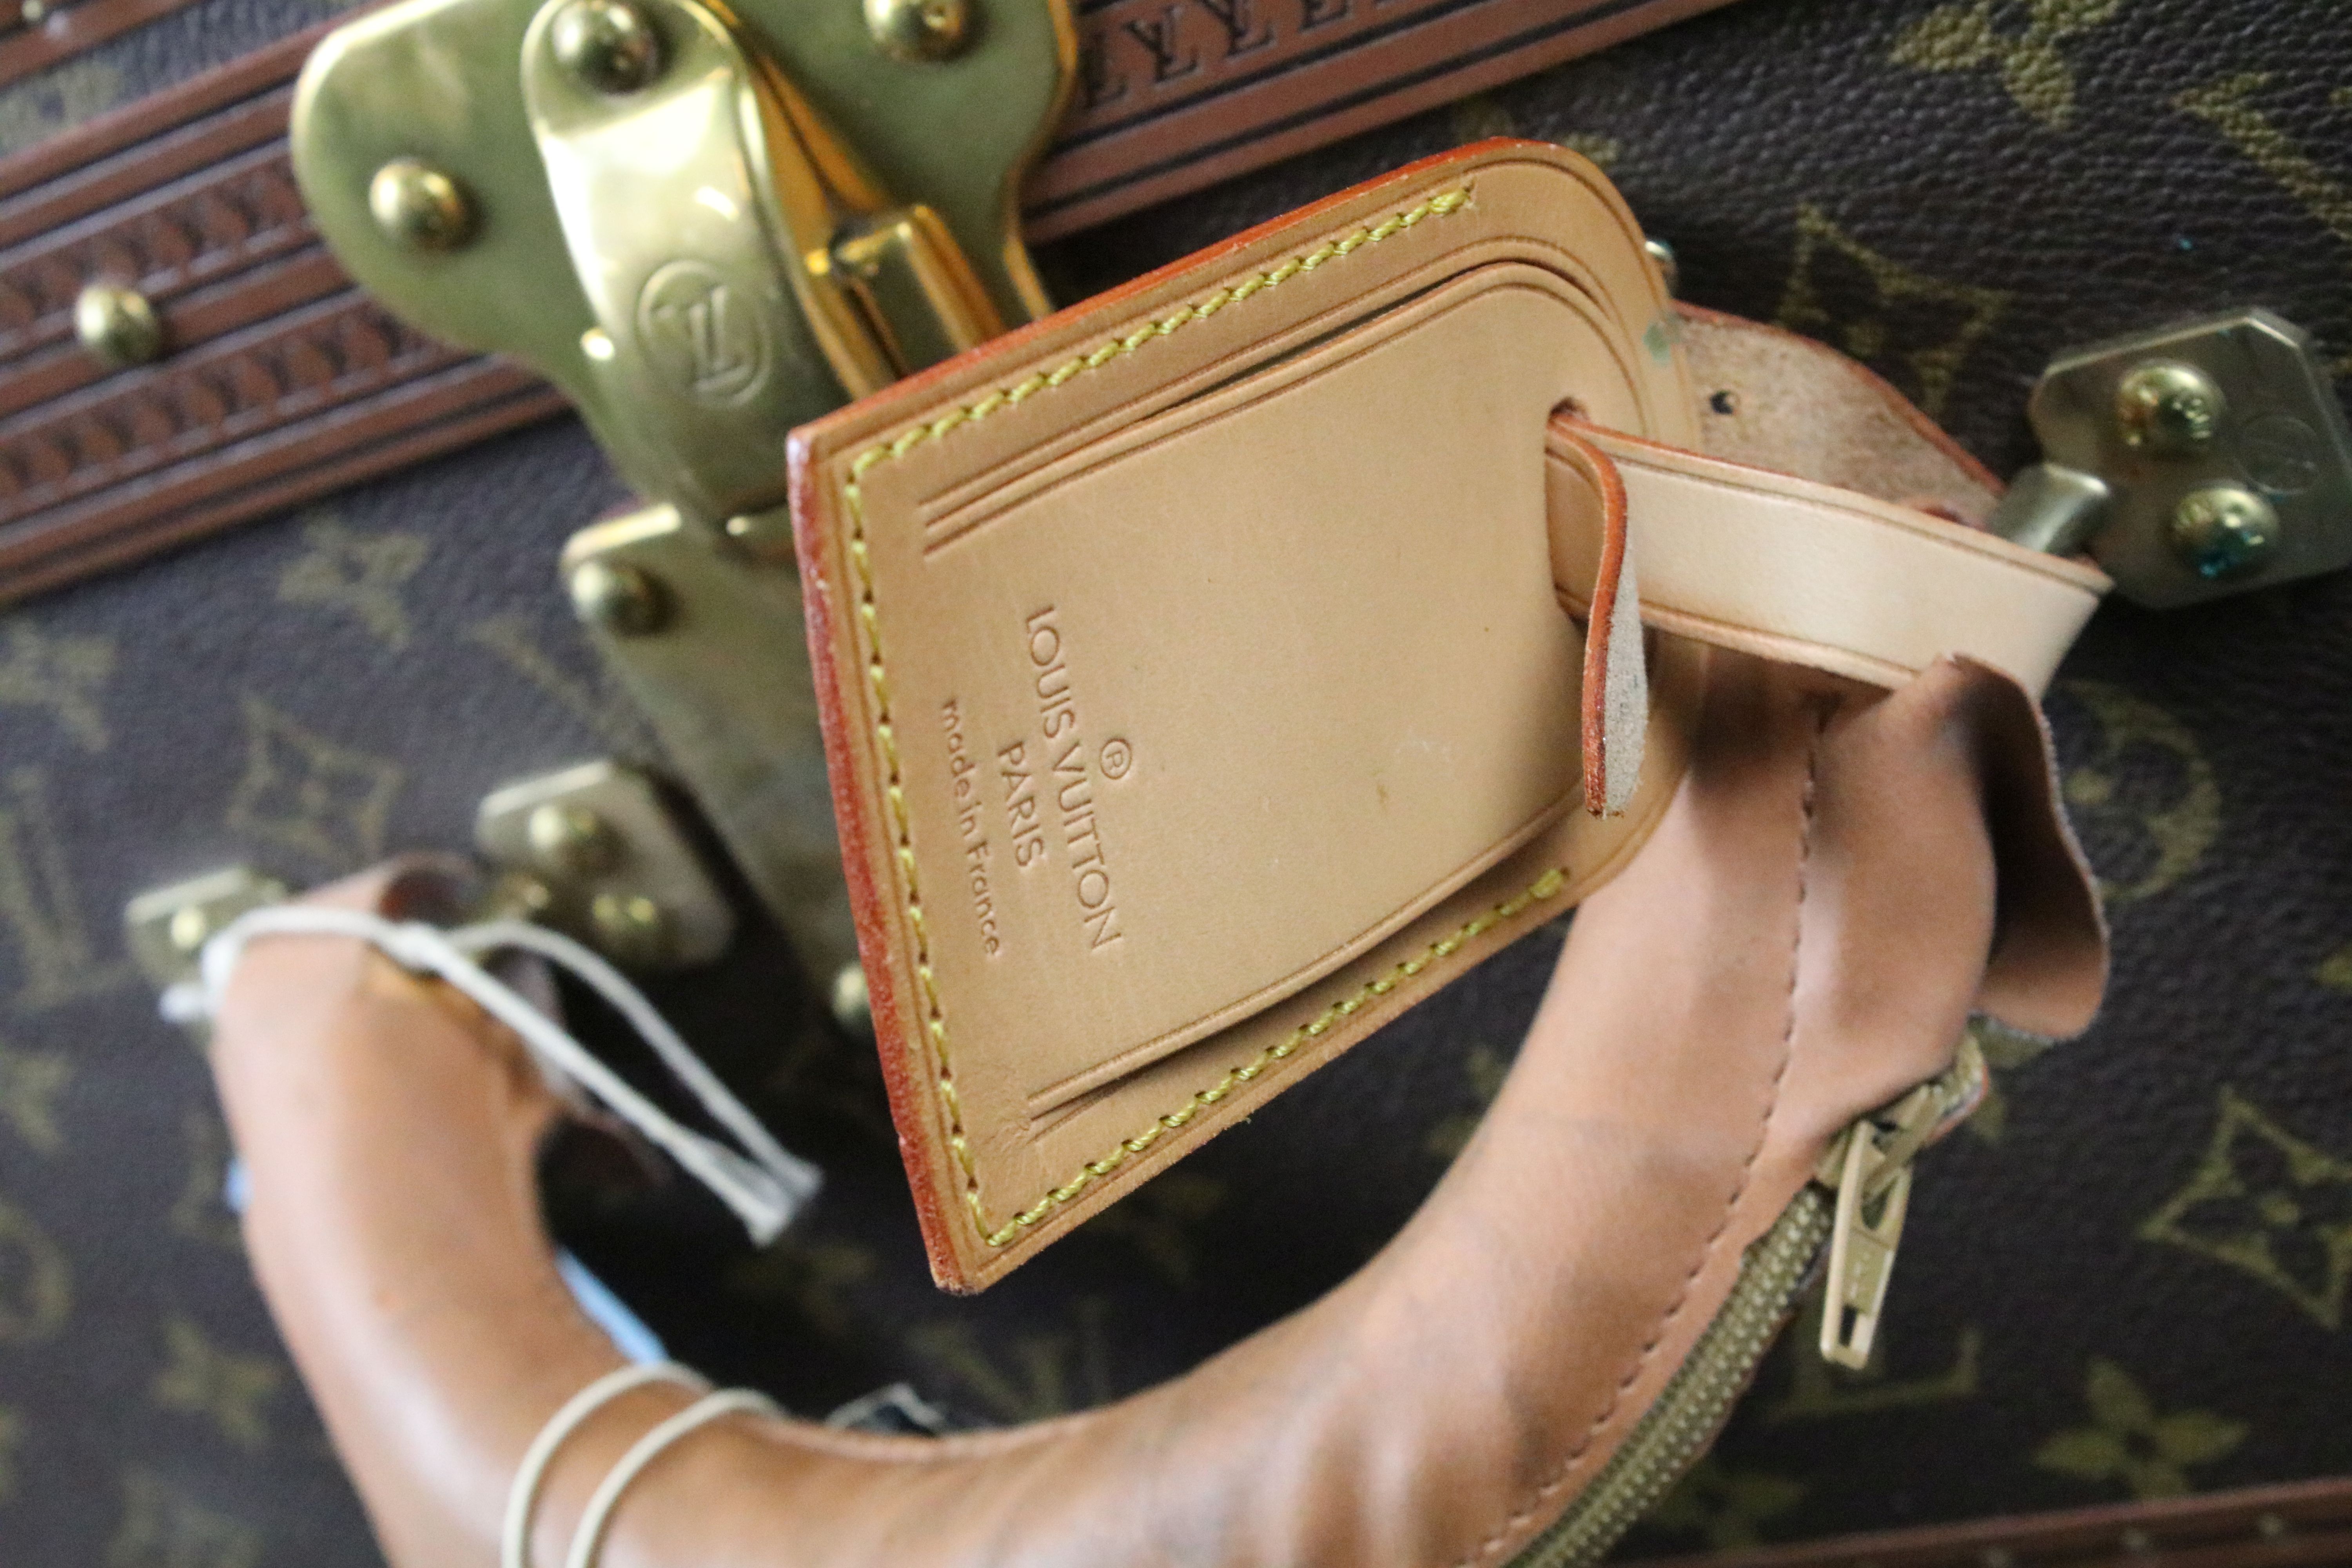 Louis Vuitton - Monogrammed canvas trunk with brass fittings and lock, opening to reveal beige - Image 11 of 17